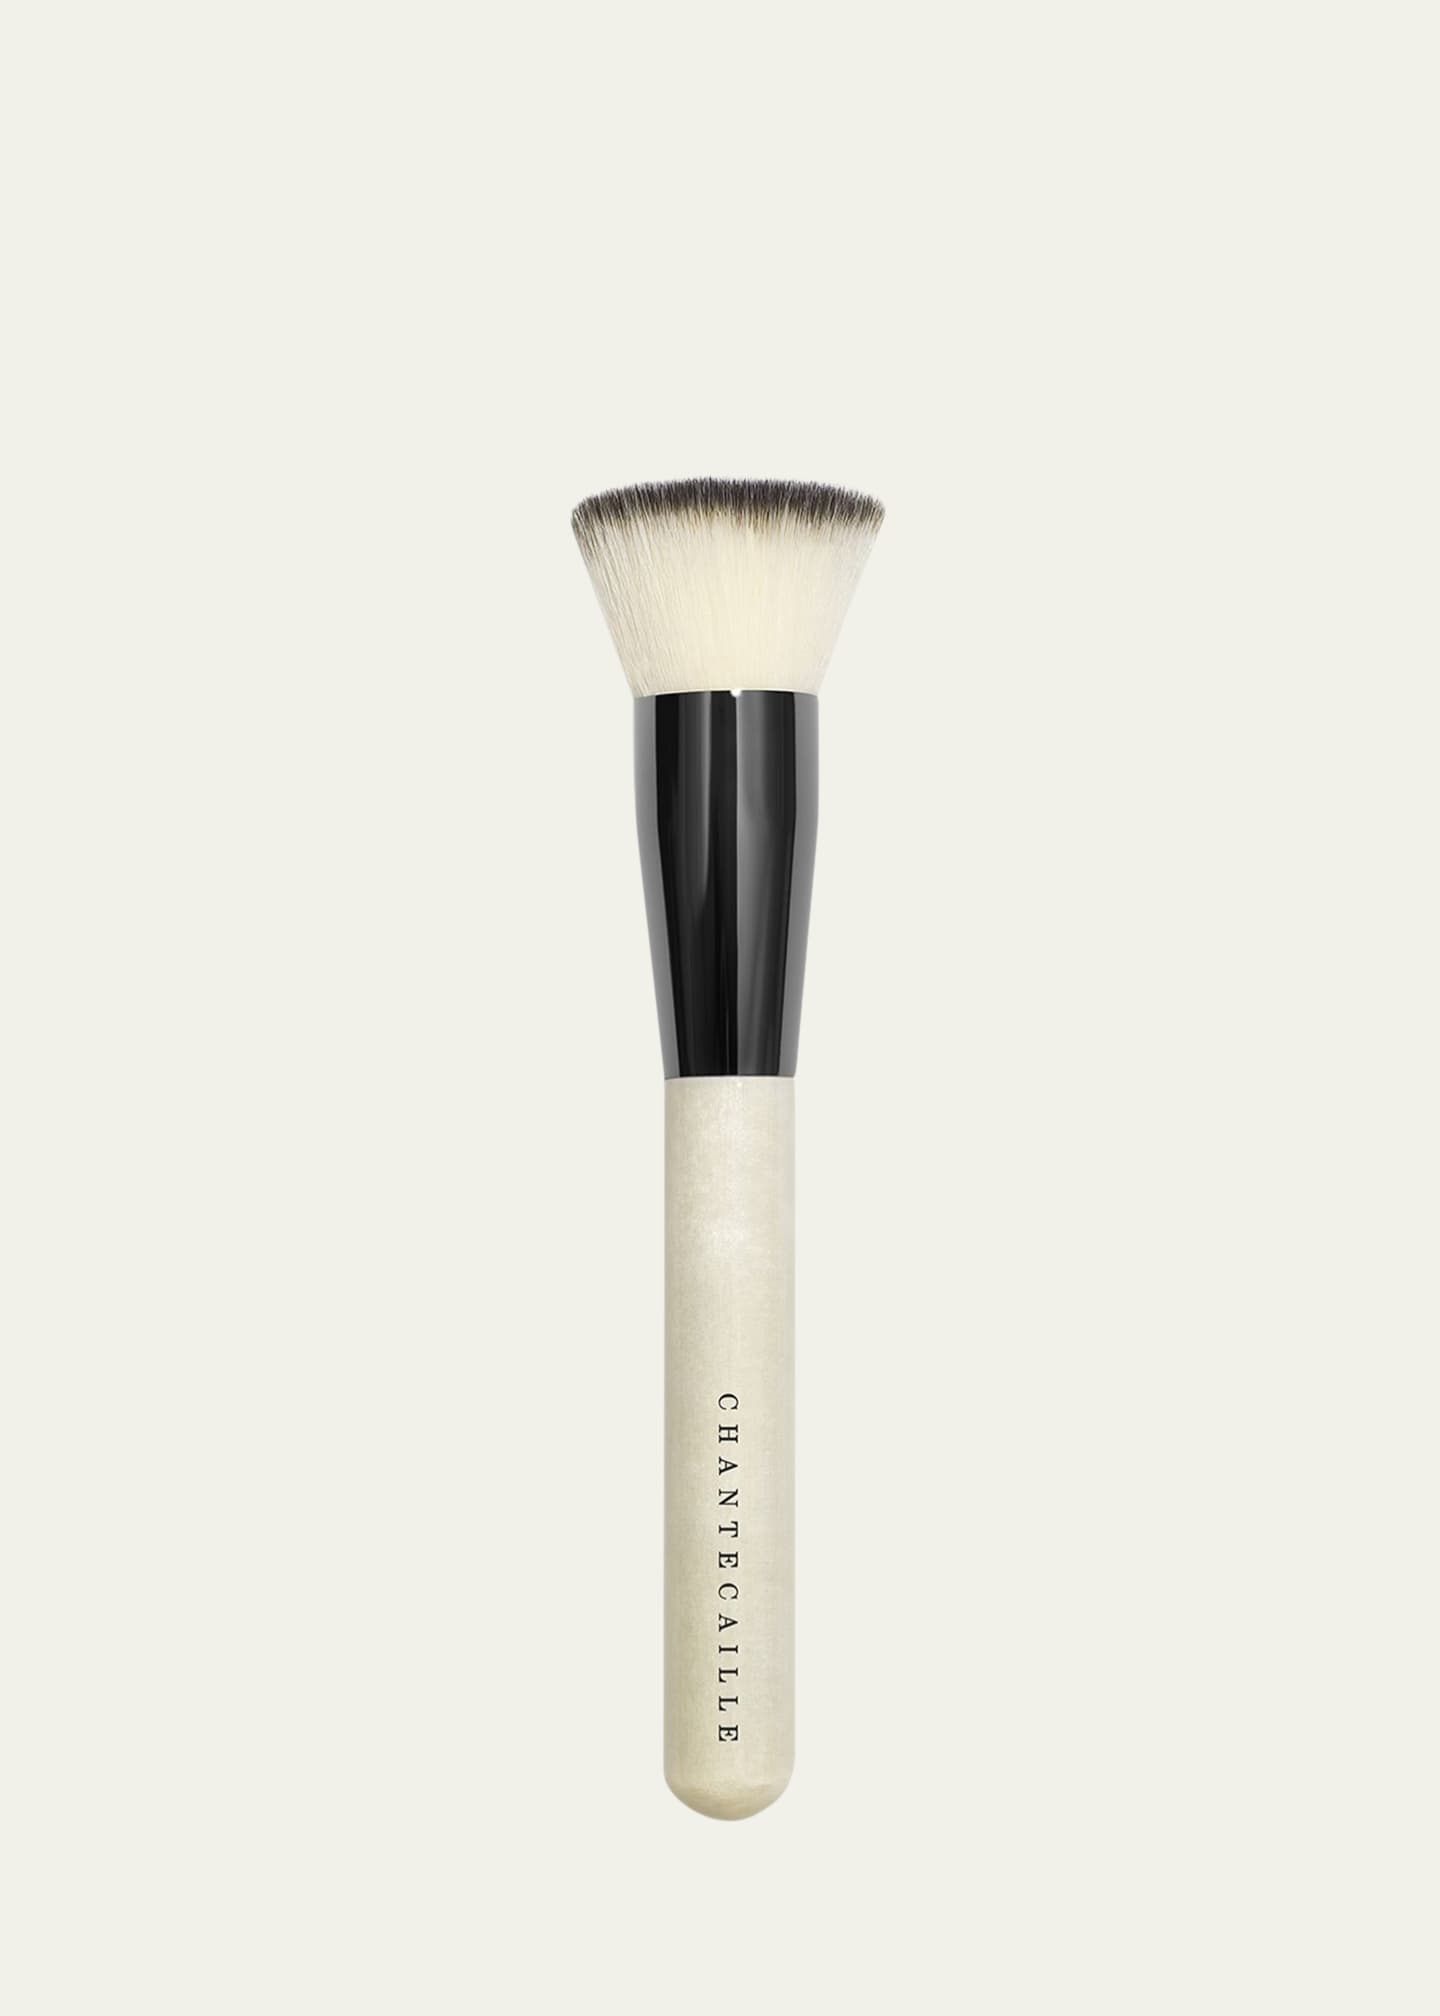 Chantecaille Buff and Blur Brush Image 1 of 2